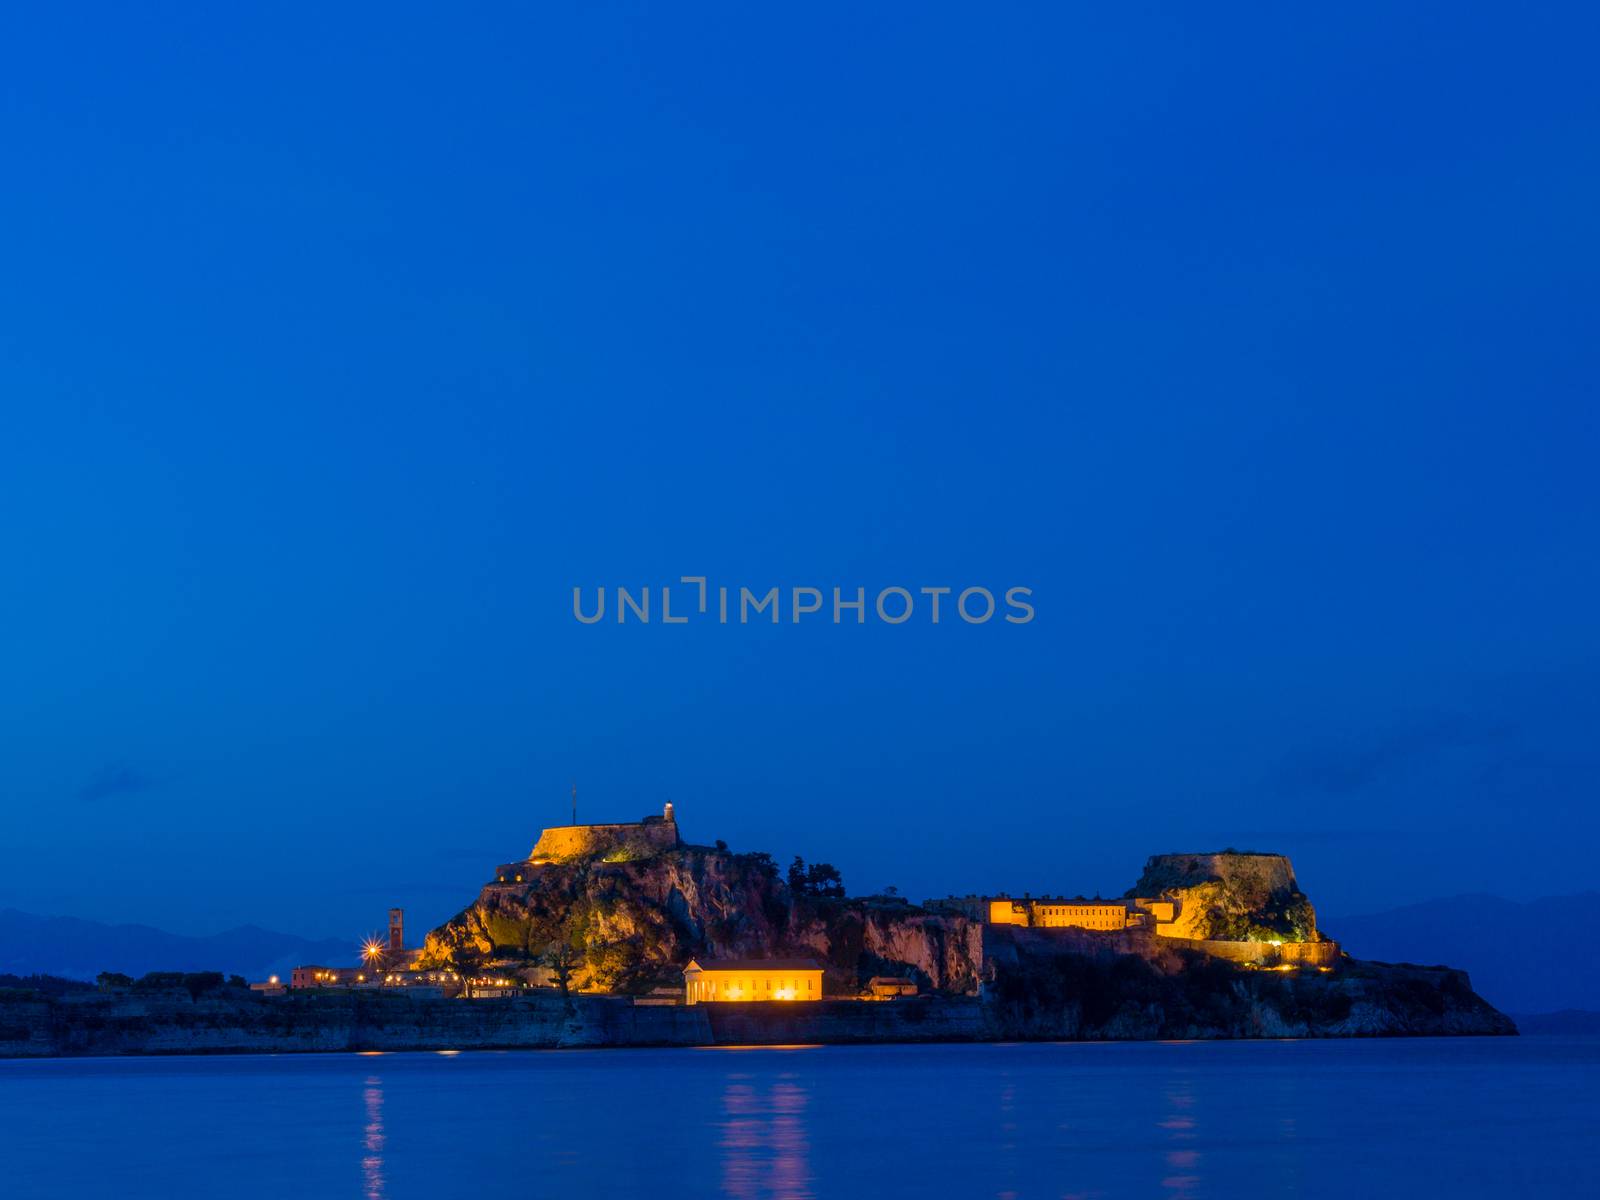 Hellenic temple and old castle at Corfu by Netfalls